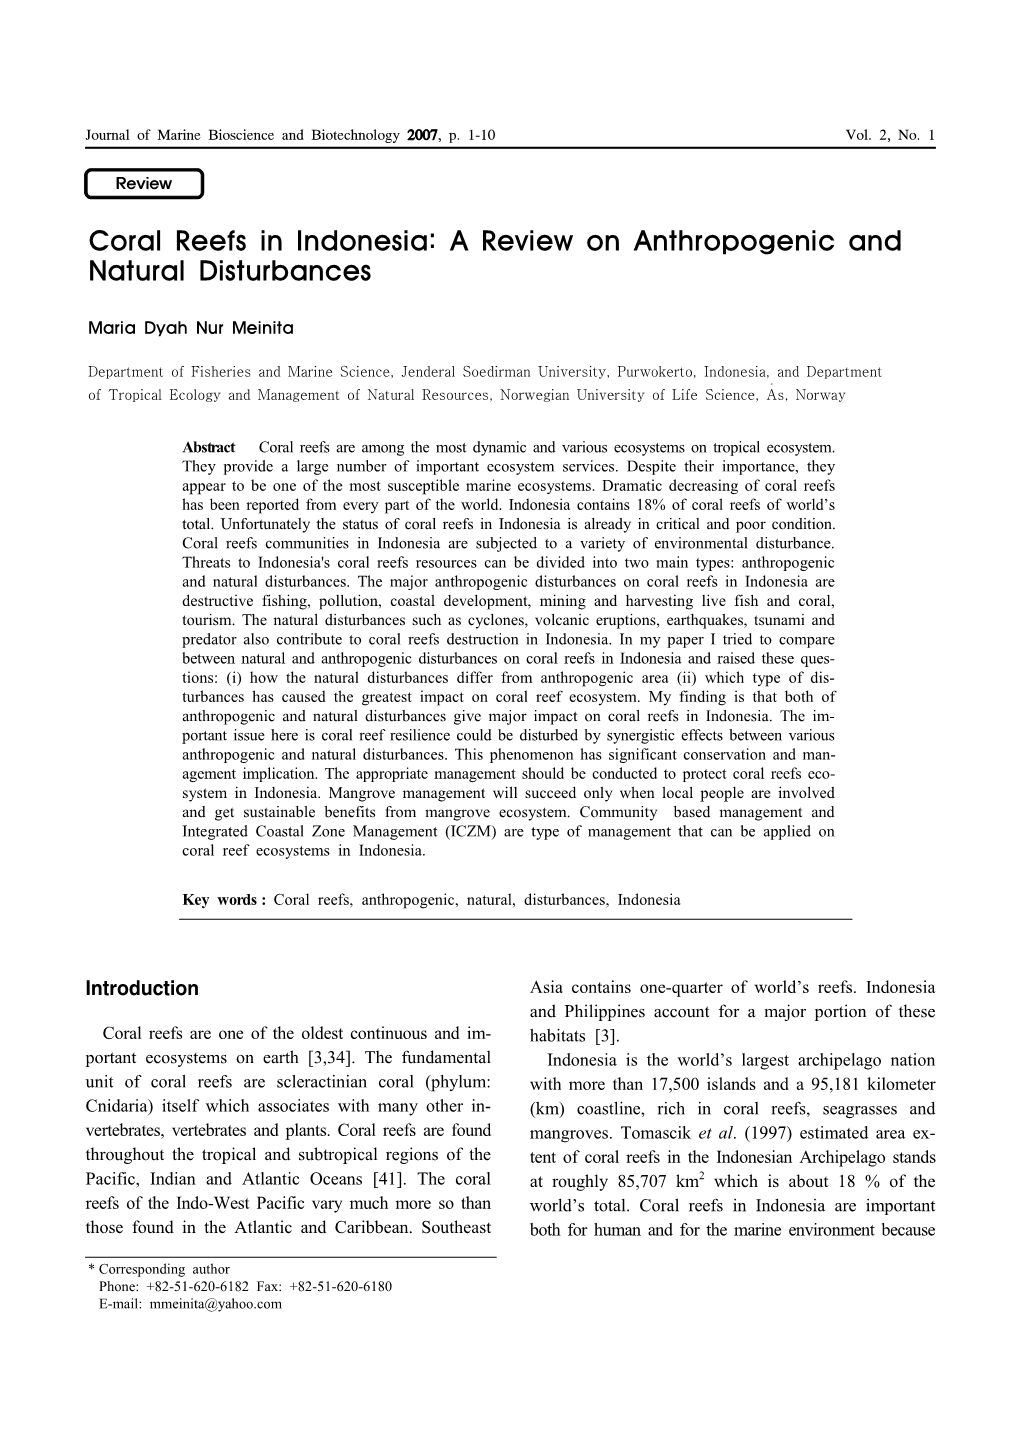 Coral Reefs in Indonesia: a Review on Anthropogenic and Natural Disturbances